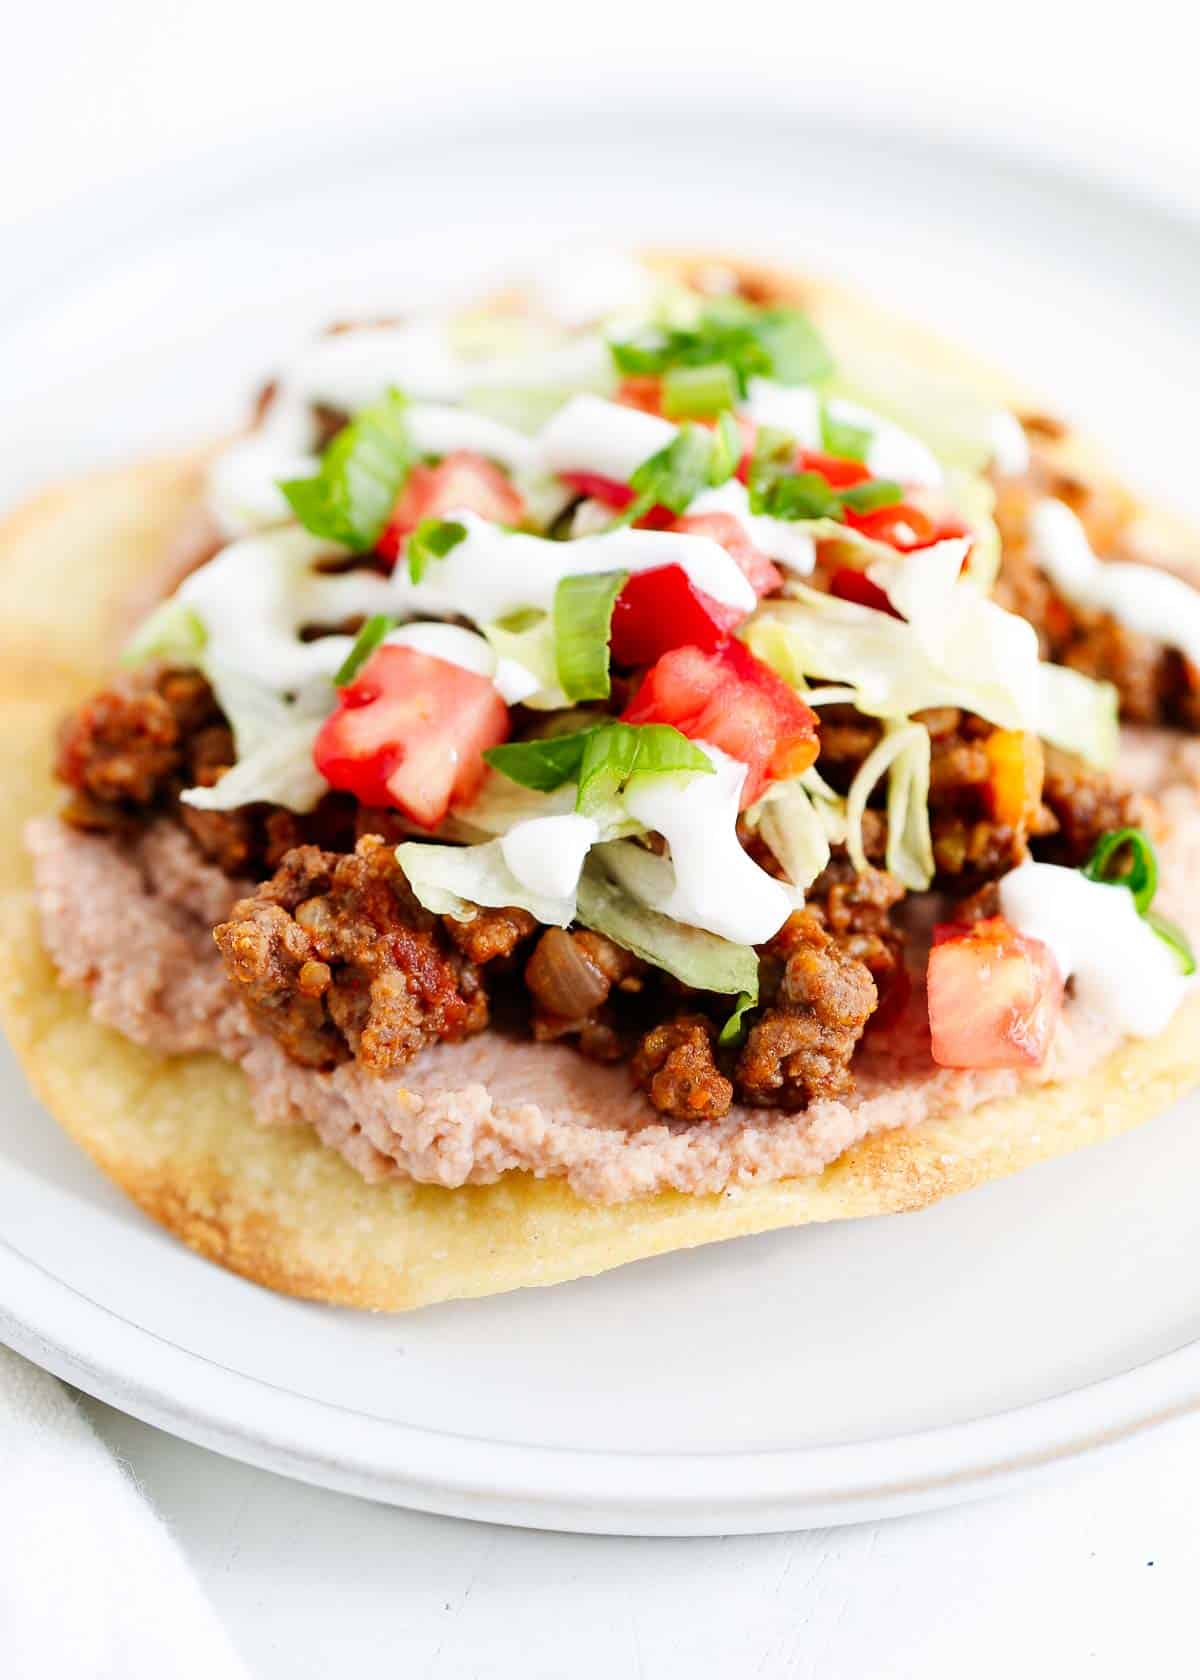 Tostada with toppings on a white plate.